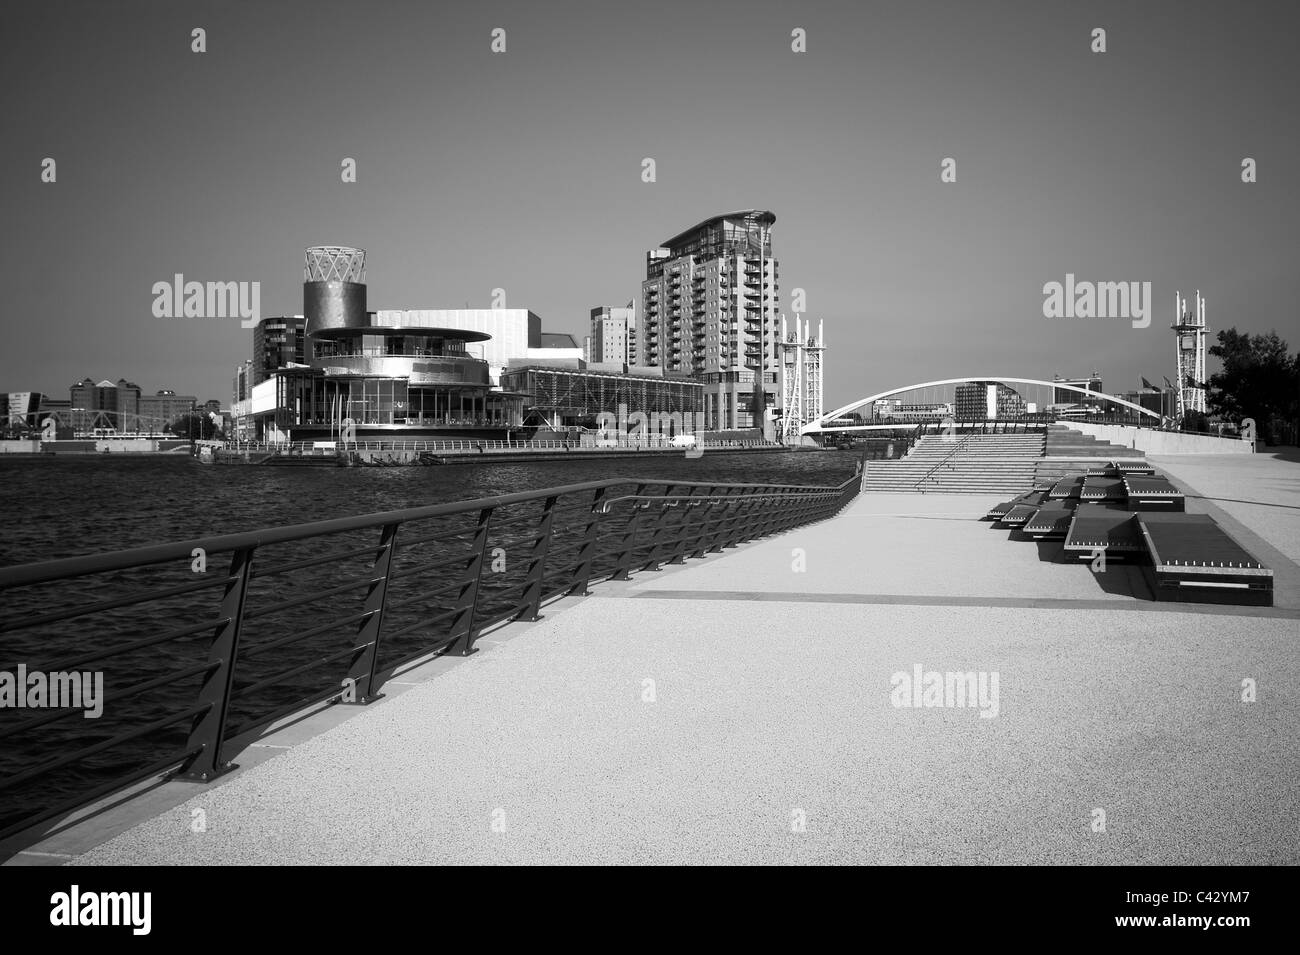 The Lowry, Millennium Bridge and apartments, taken from outside the Imperial War Museum, Salford Quays, Manchester, UK Stock Photo